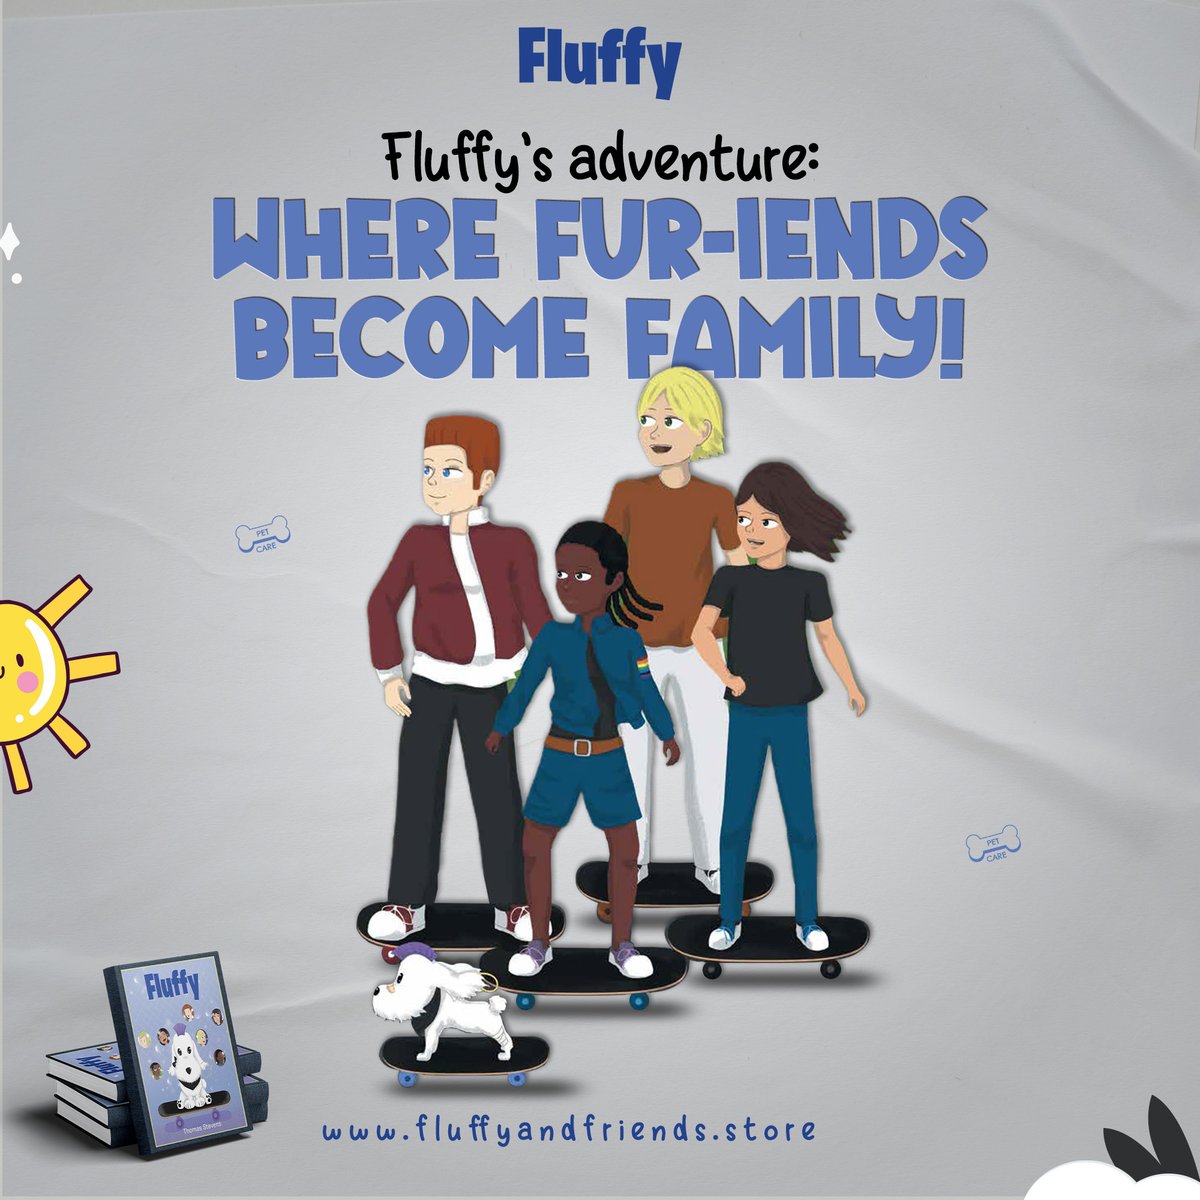 Come along for the tongue-flapping, tail-wagging pleasure as we go on fluffy adventures that will make your heart melt more quickly than an ice cream on a hot day. amzn.com/1662454406/ #Fluffy #ThomasStevens #FluffyAndFriends #inclusivity #friendships #author #books #booktwt